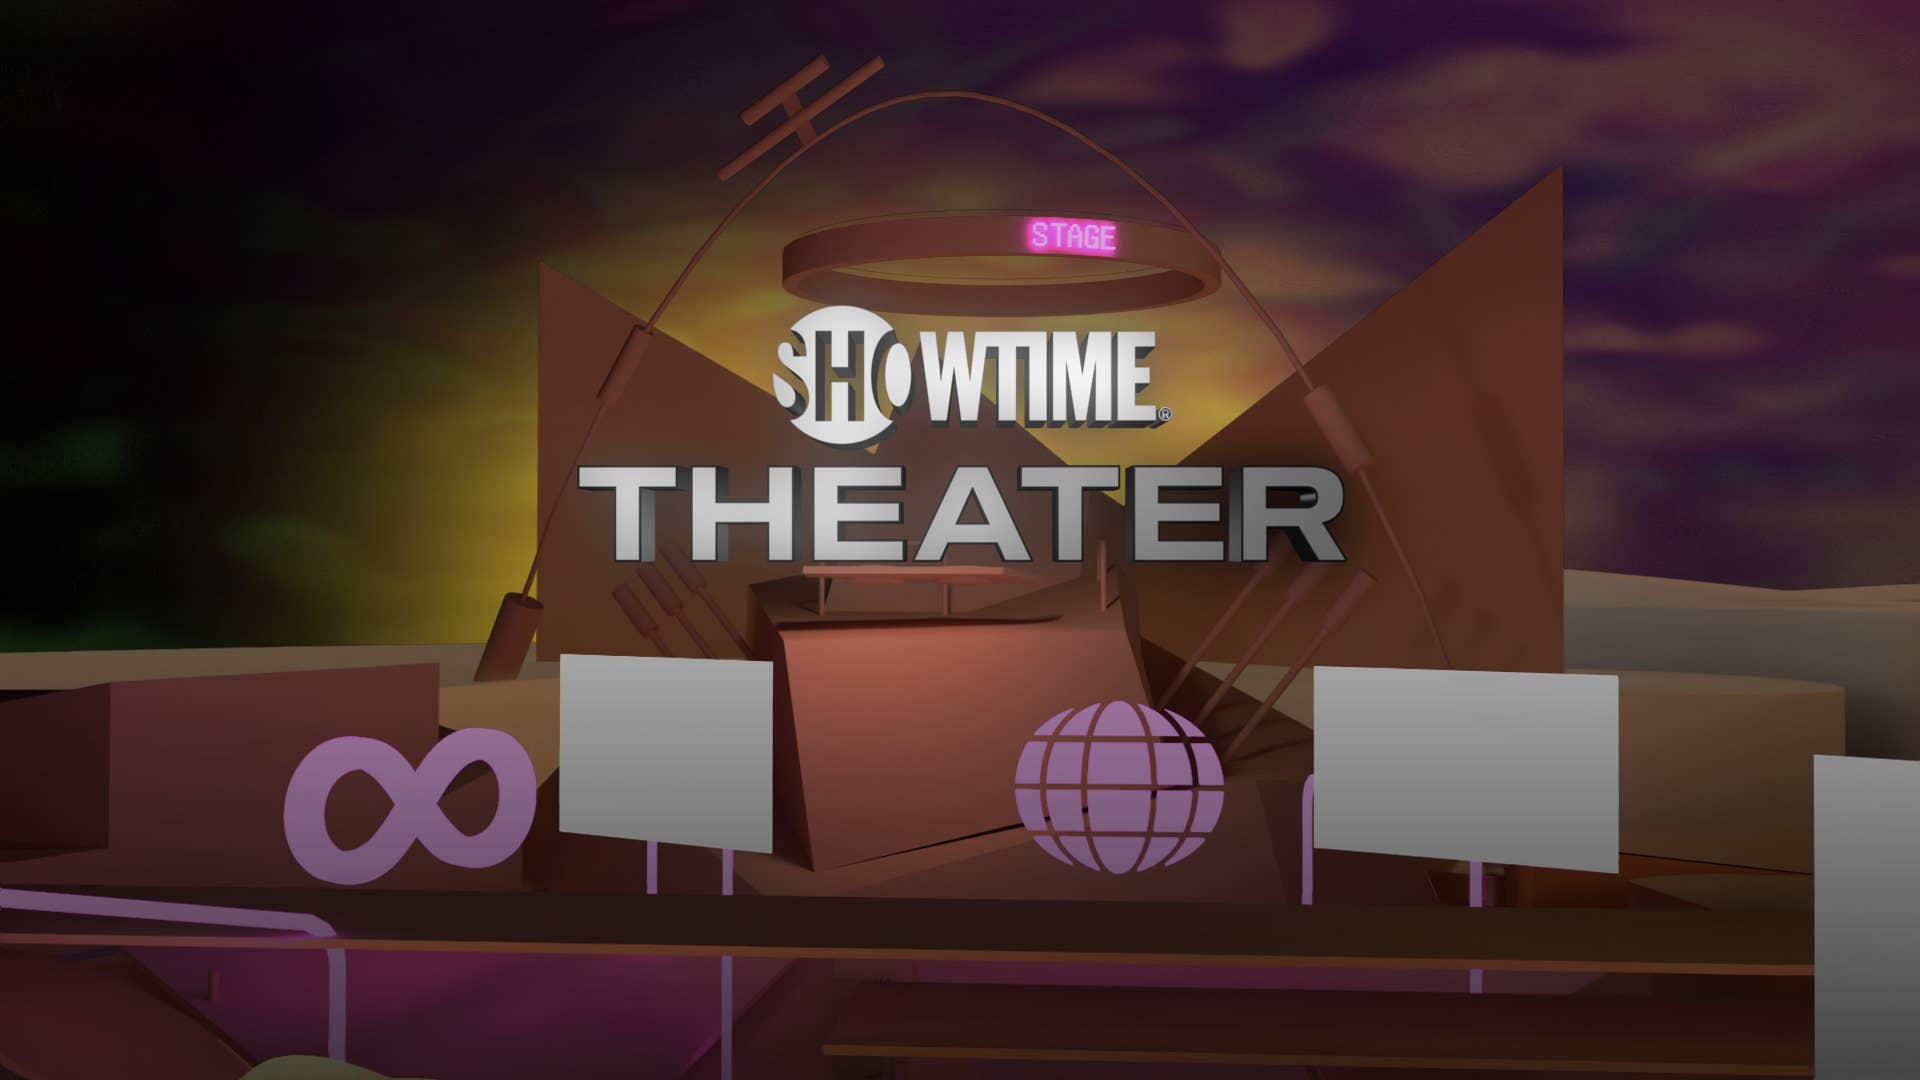 Showtime Theater ComplexLand 2020